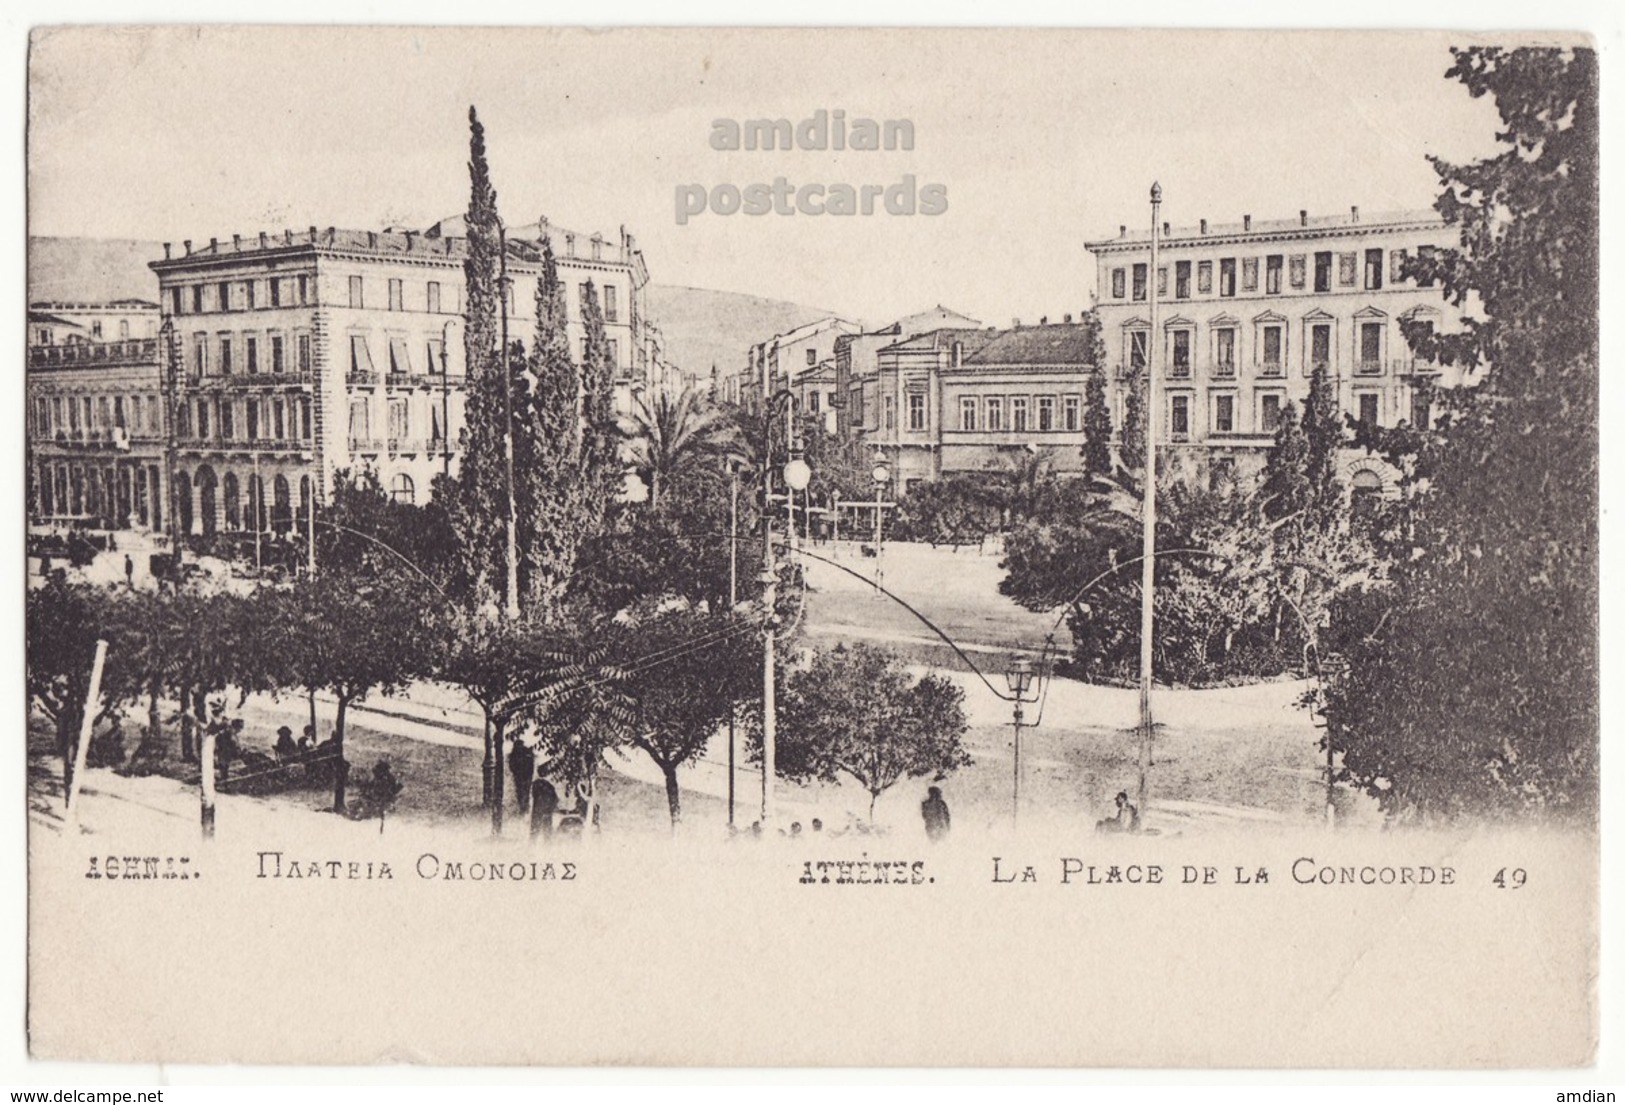 GREECE ATHENS OMONOIA SQUARE & BUILDINGS, PLACE CONCORDE 1900s  EARLY VIEW VINTAGE ANTIQUE POSTCARD - Greece